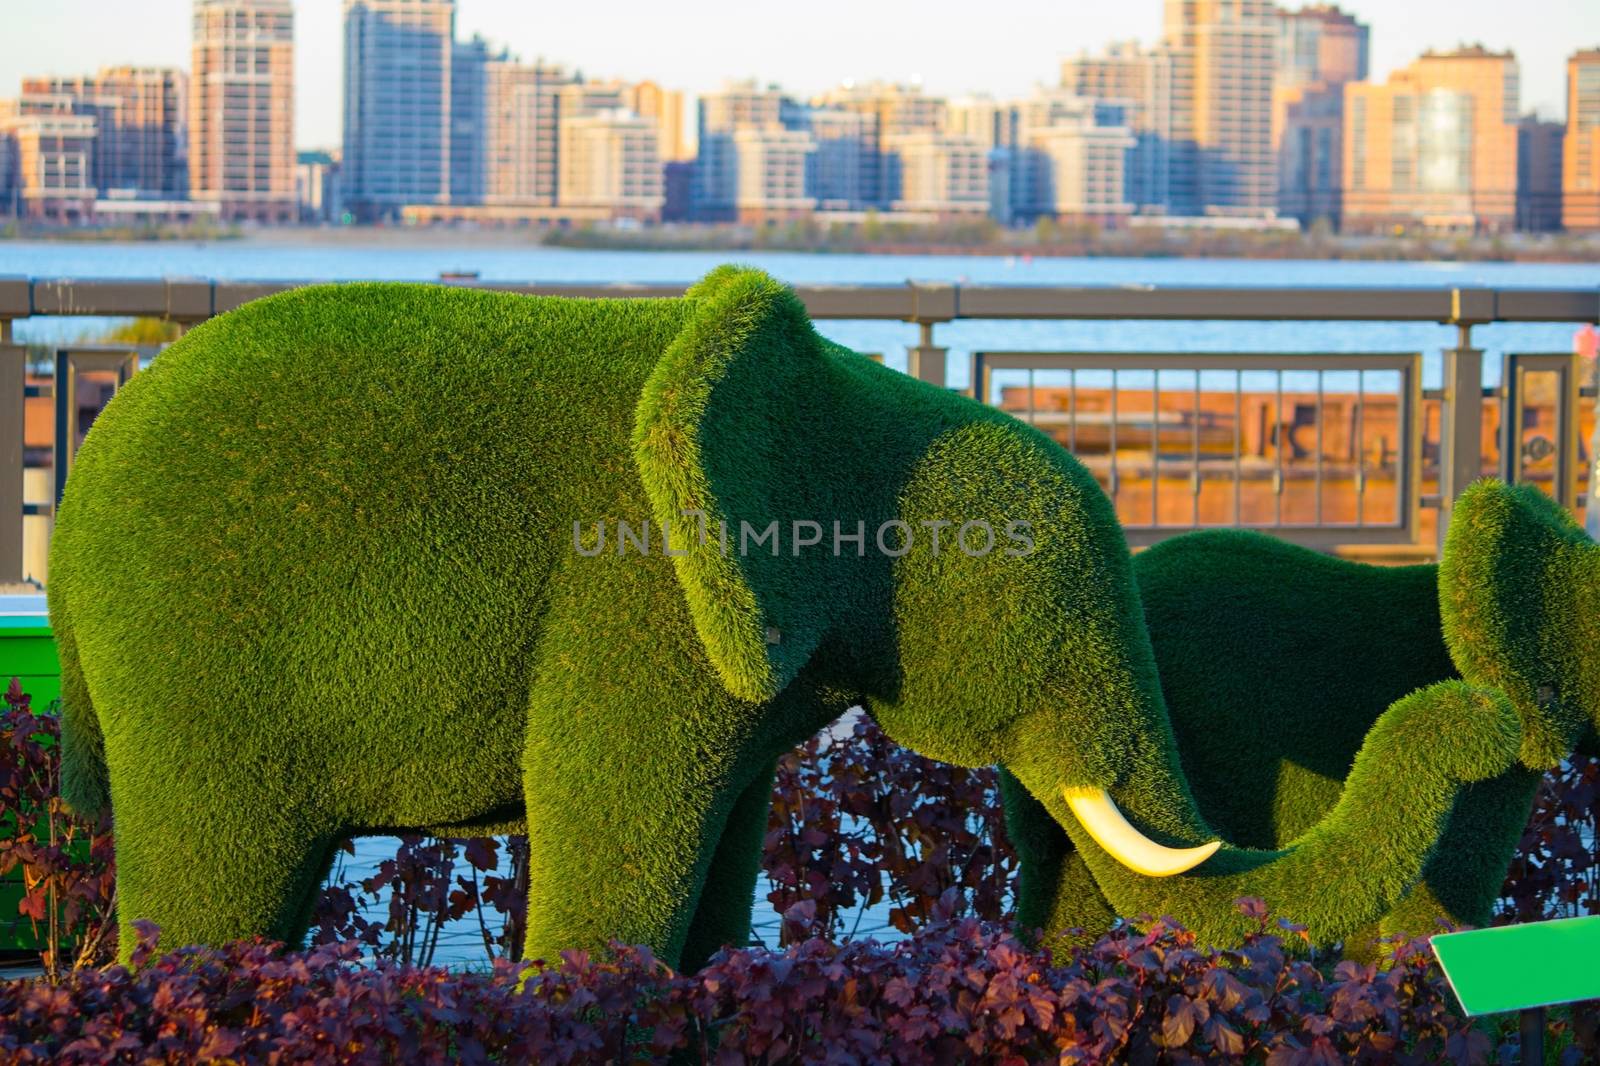 green elephants made by clipping trees. Kazan, Russia